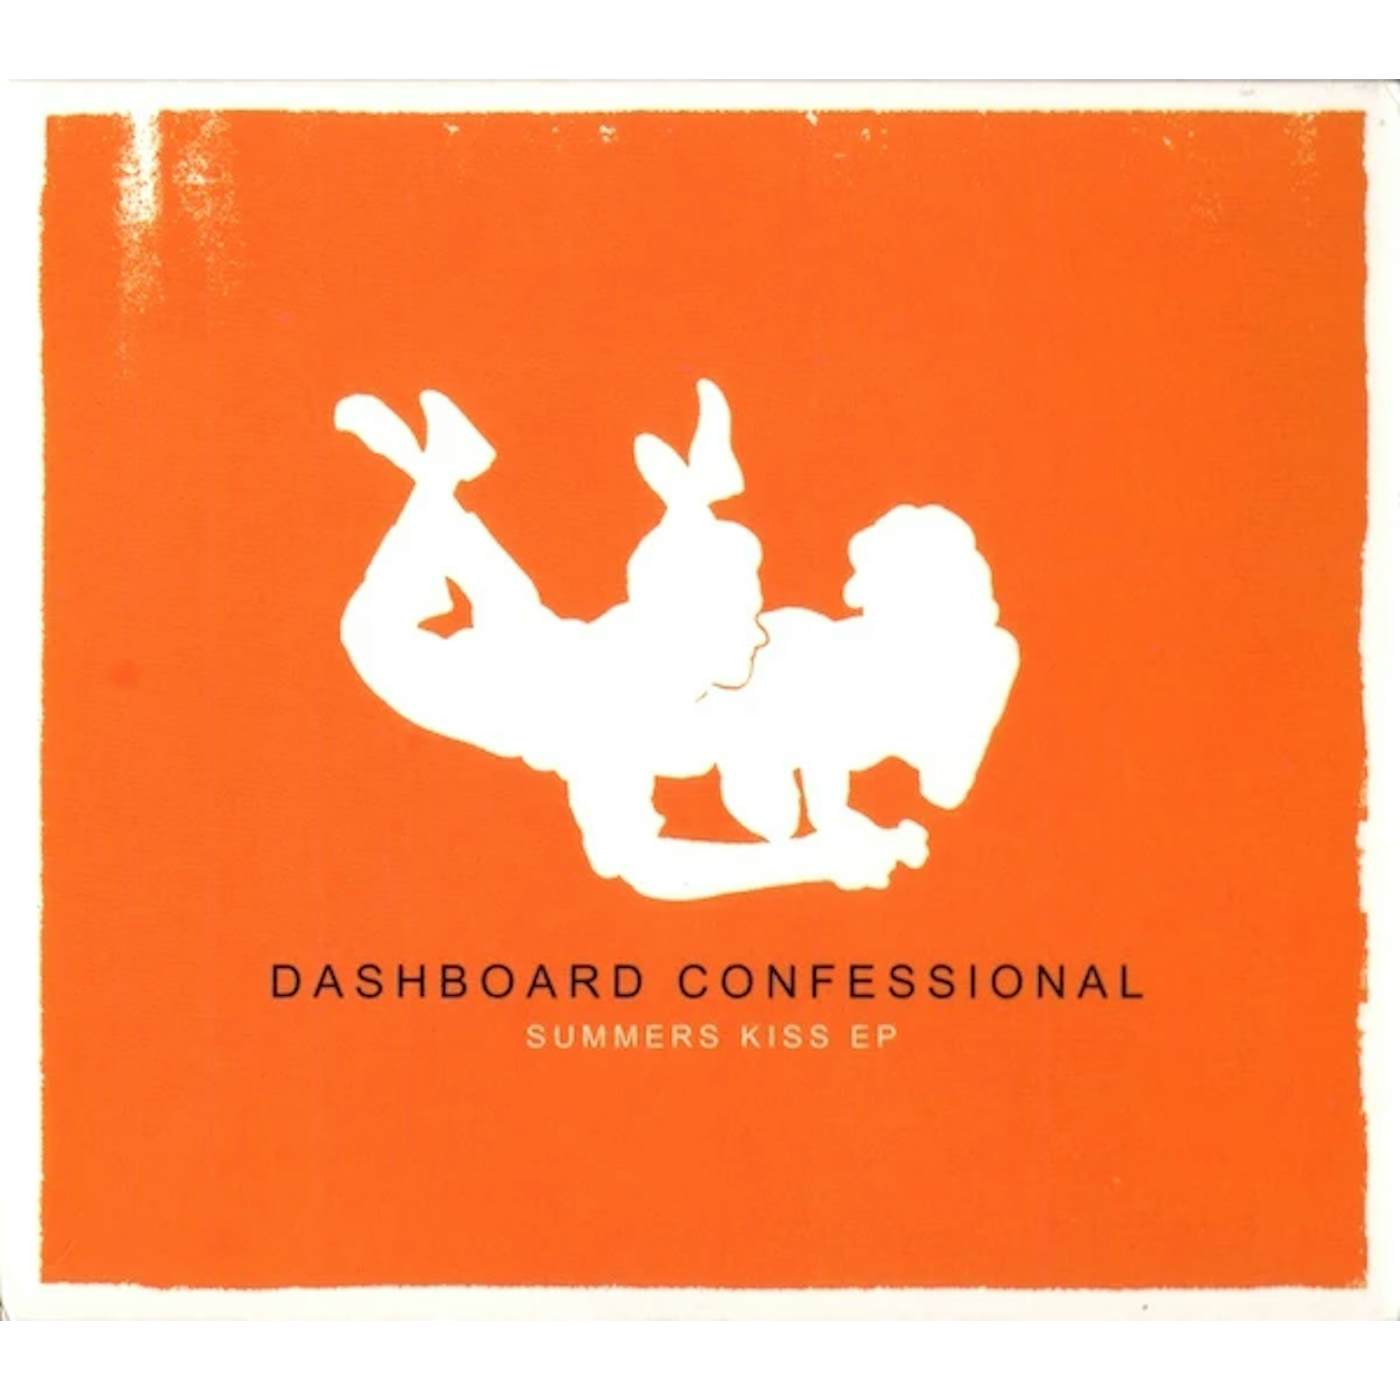 Dashboard Confessional Summers Kiss Vinyl Record